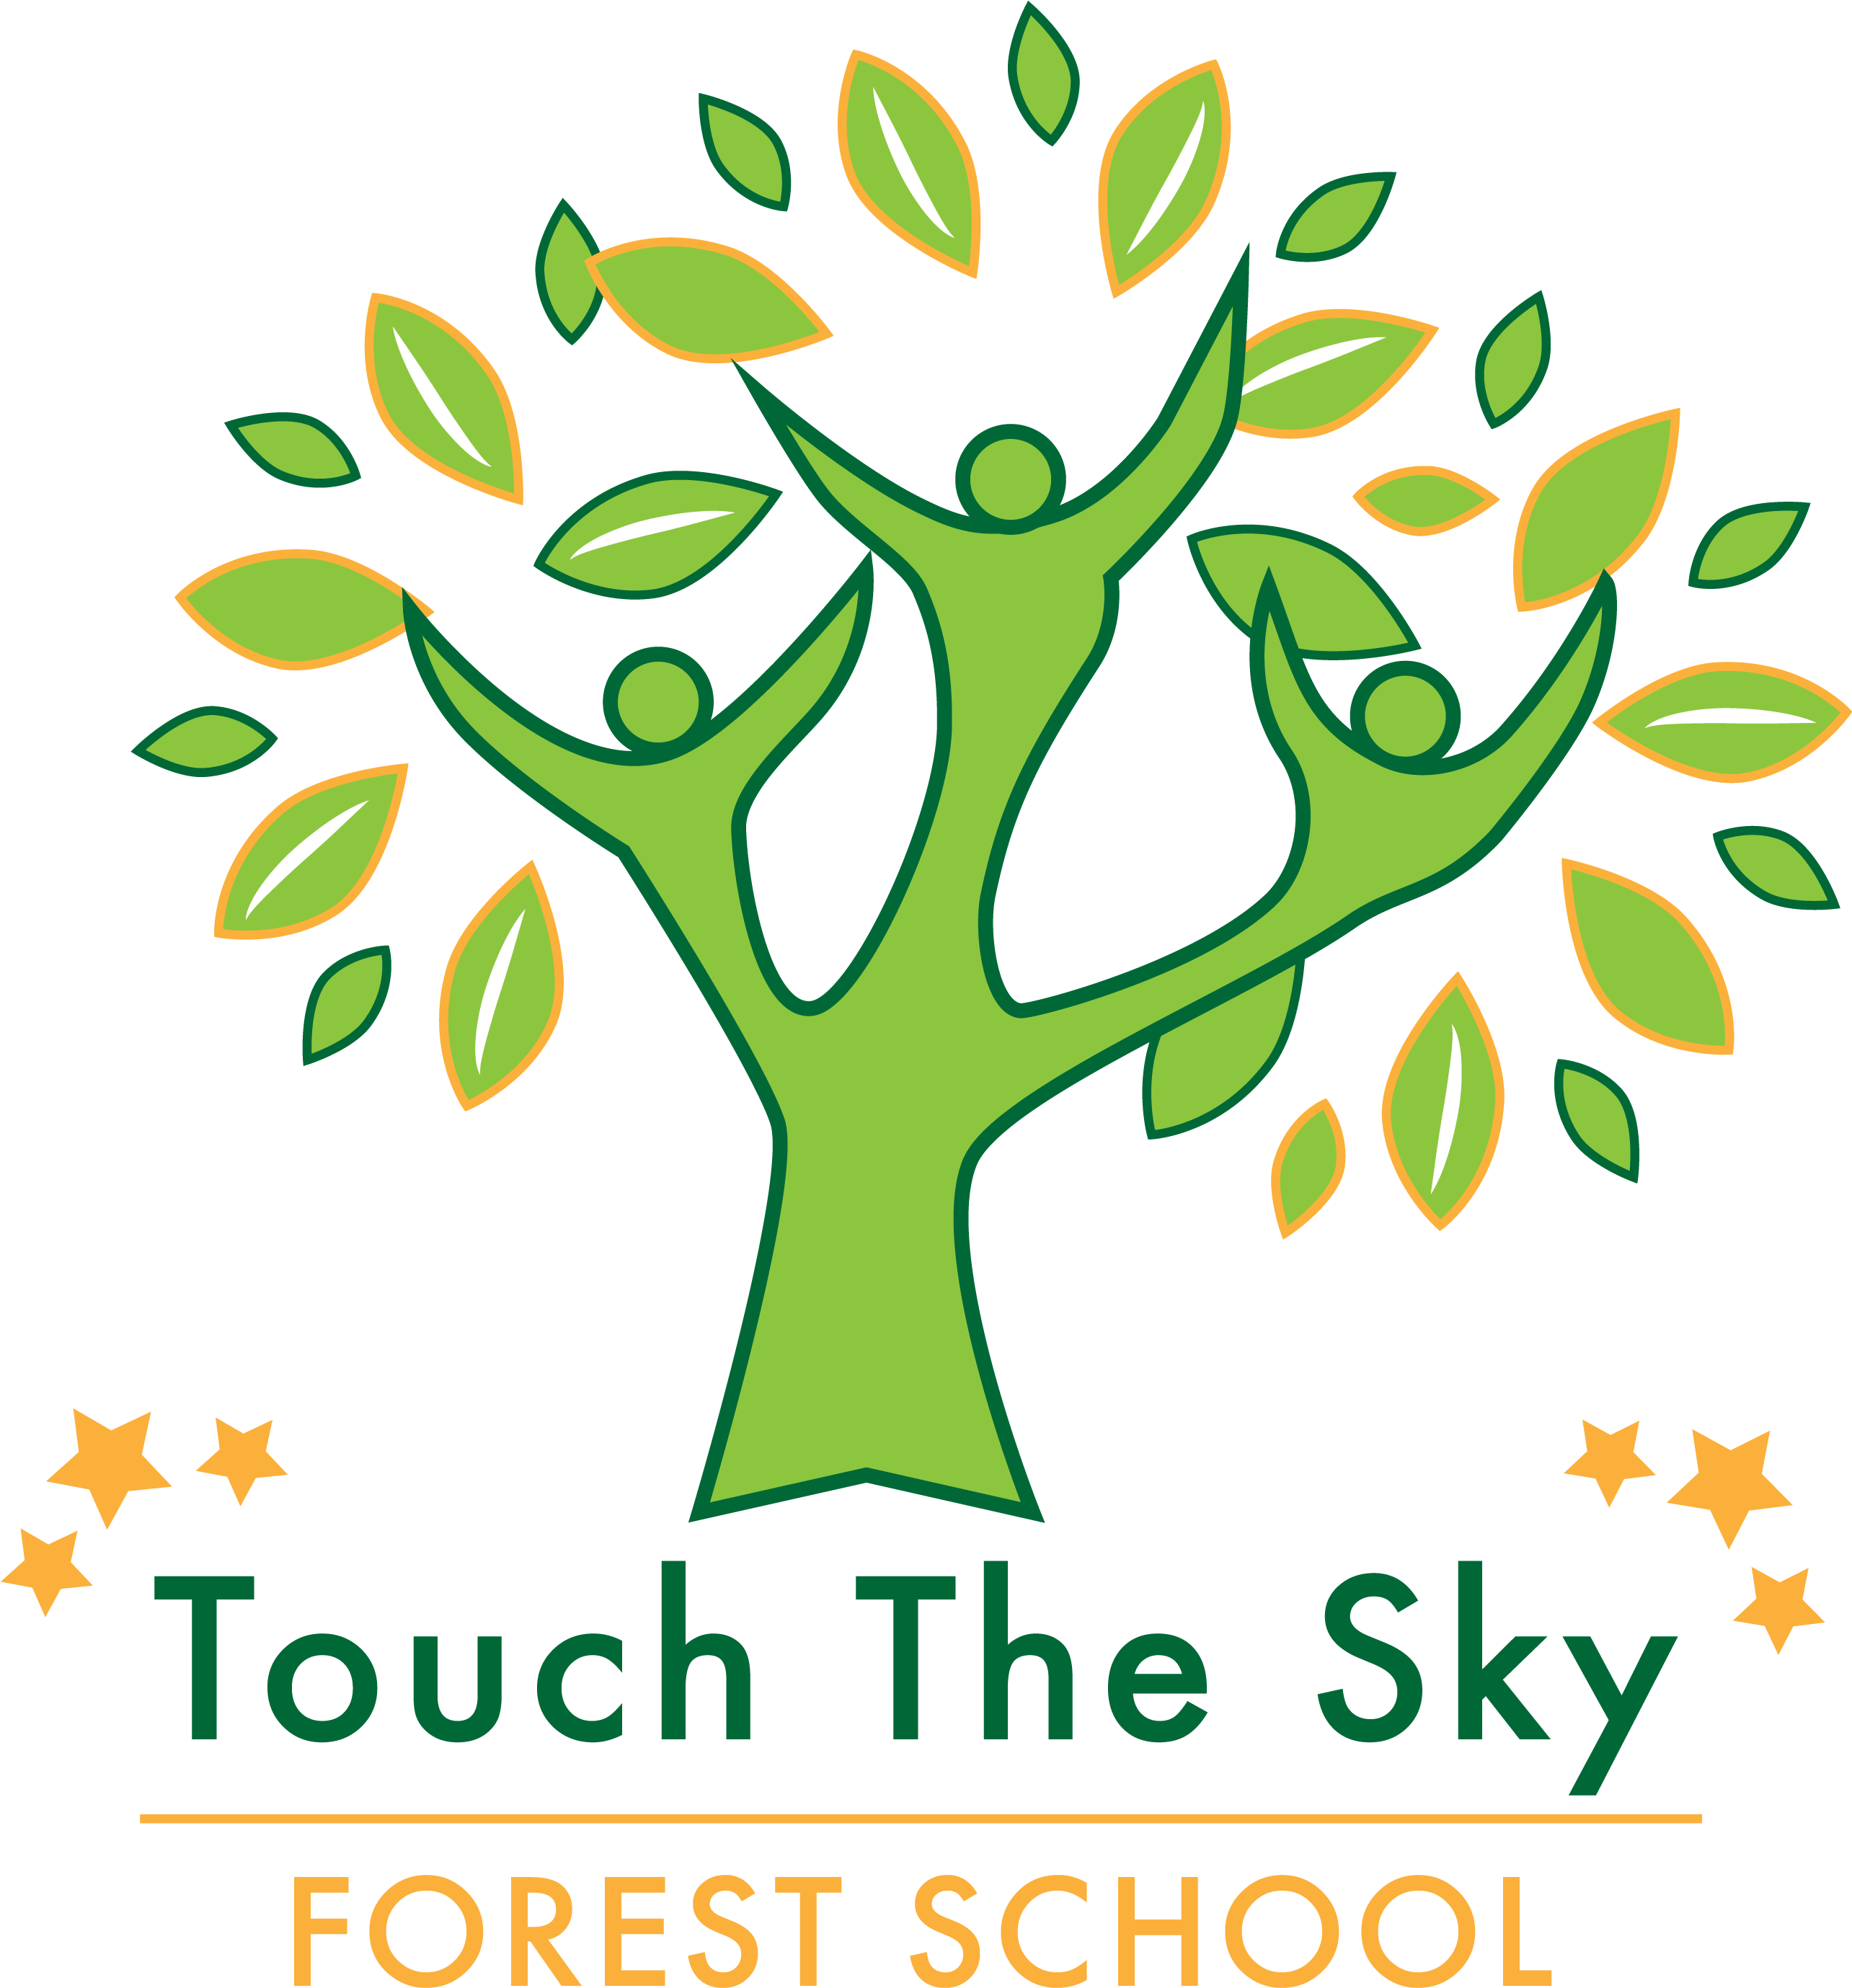 Touch The Sky Forest School On Hoop - Forest School (2568x2811)